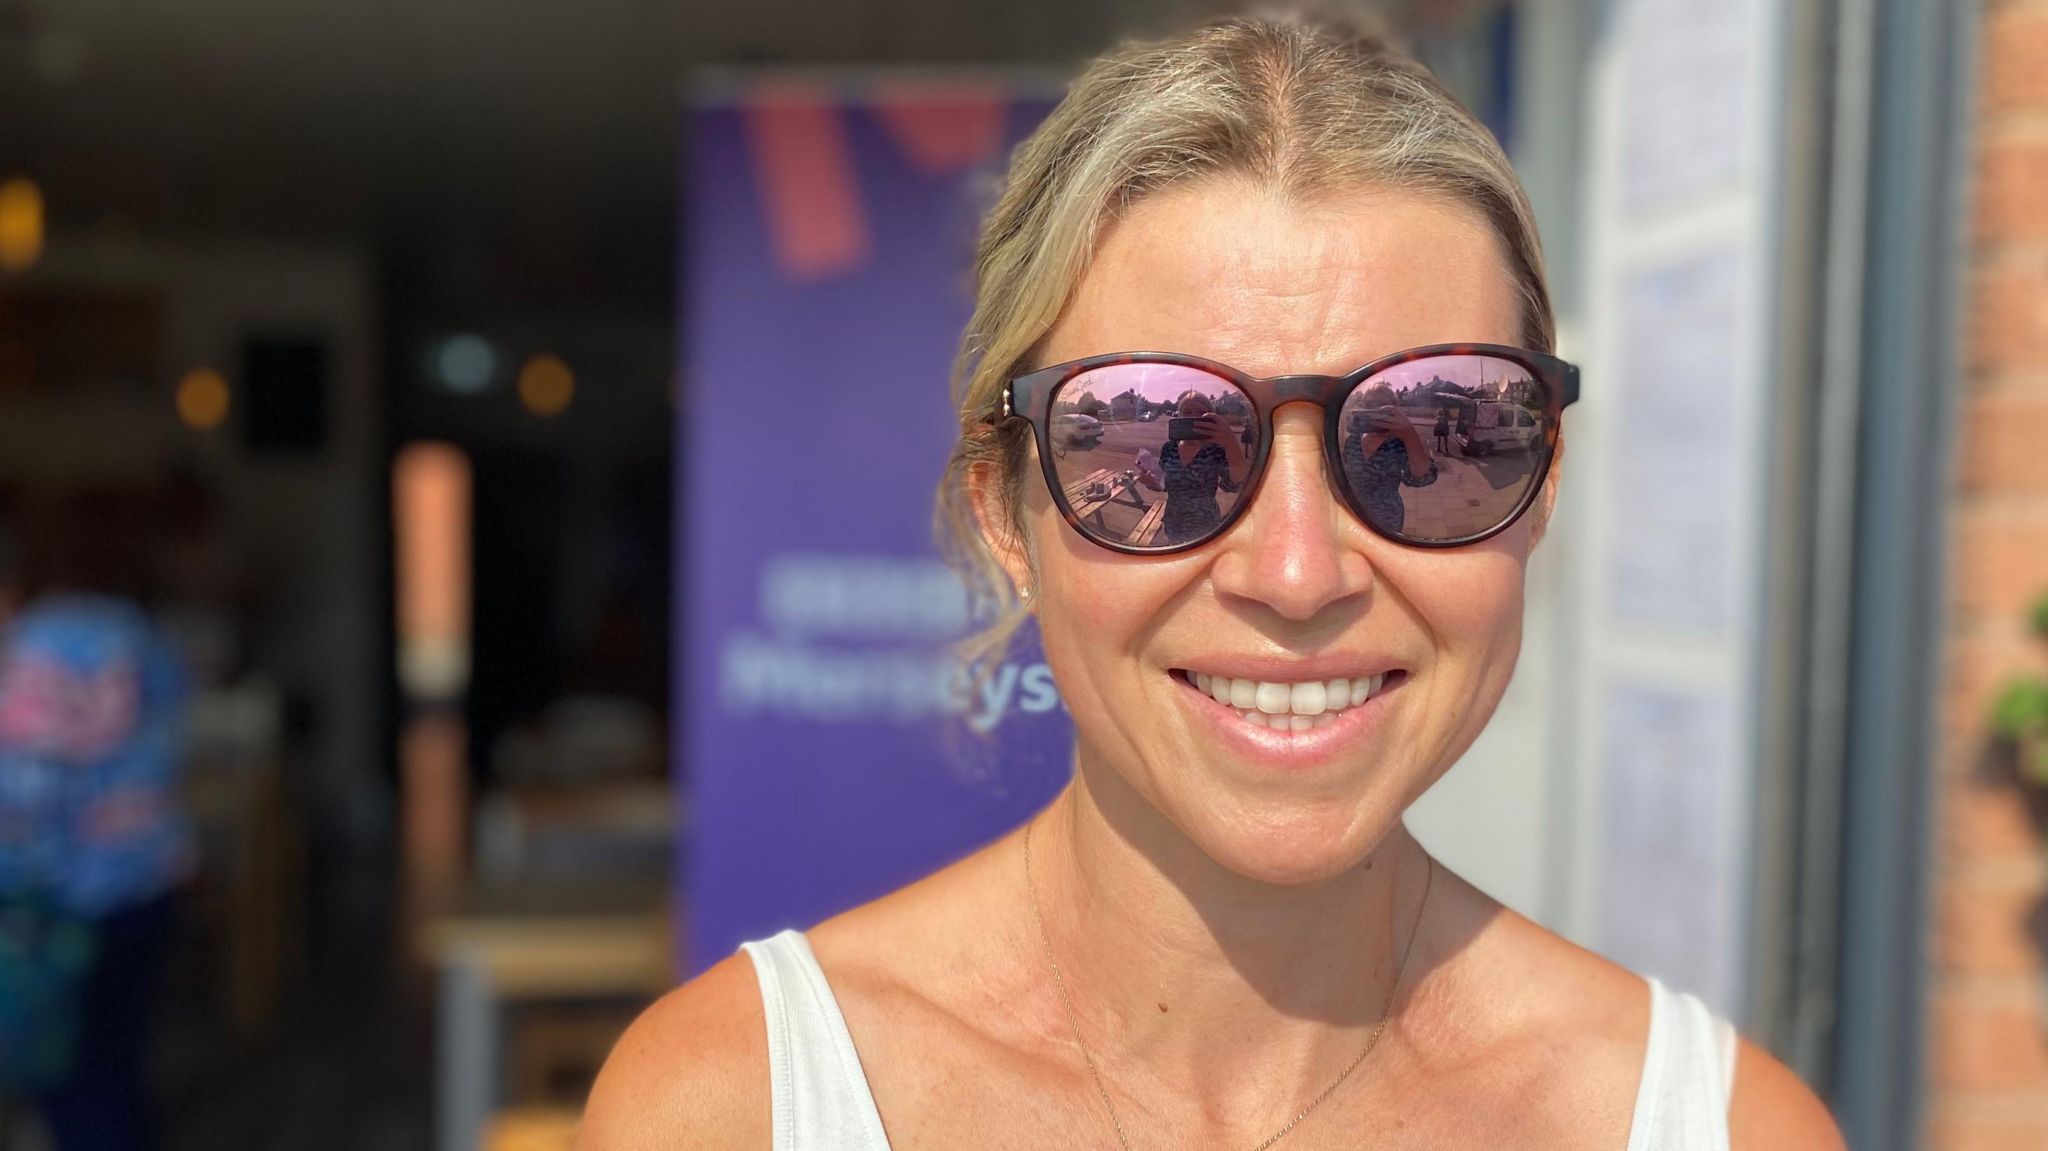 A smiling Rachel Lightburn, with blonde tied-back hair, reflective sunglasses and wearing a white vest top, stands in front of an open cafe door, with purple BBC Radio Merseyside branding behind her